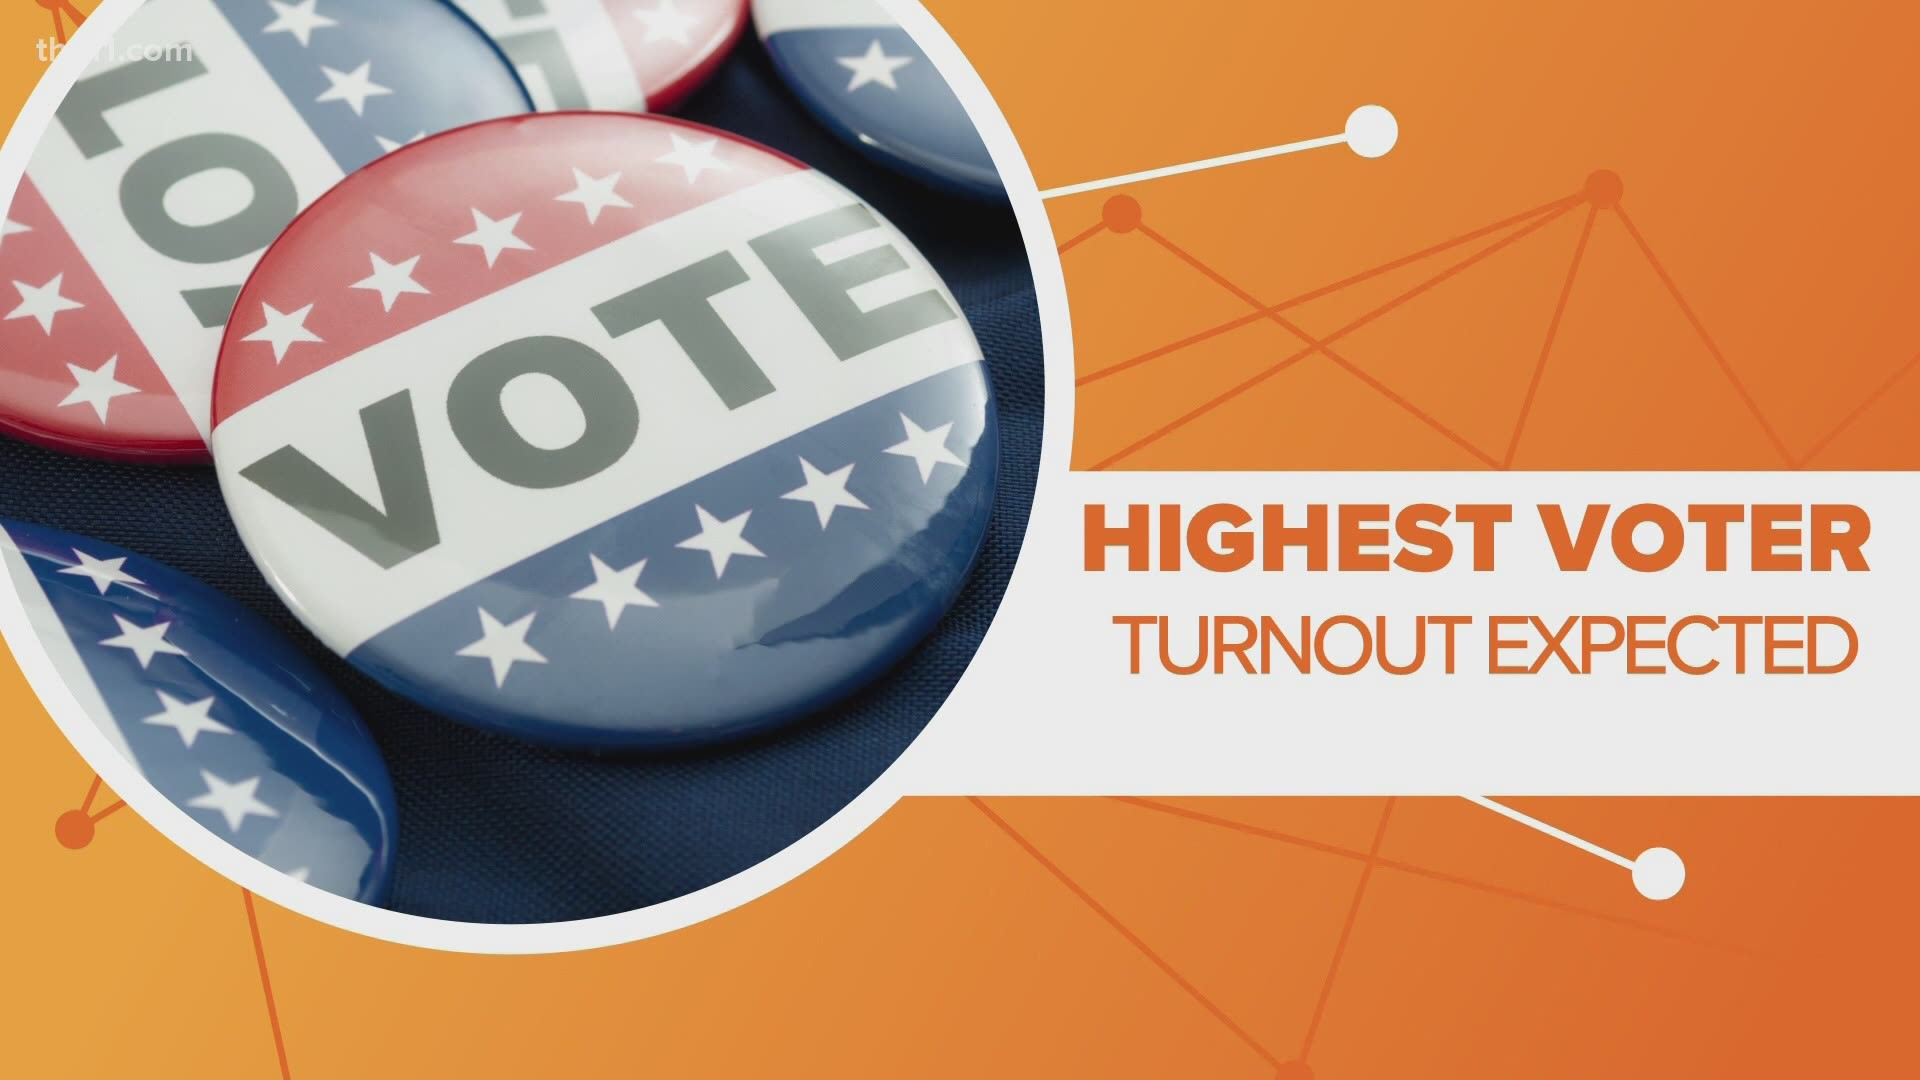 We've shown you how early voting has broken election records in Arkansas and across the country, but are we on track for the all-time high voter turnout?